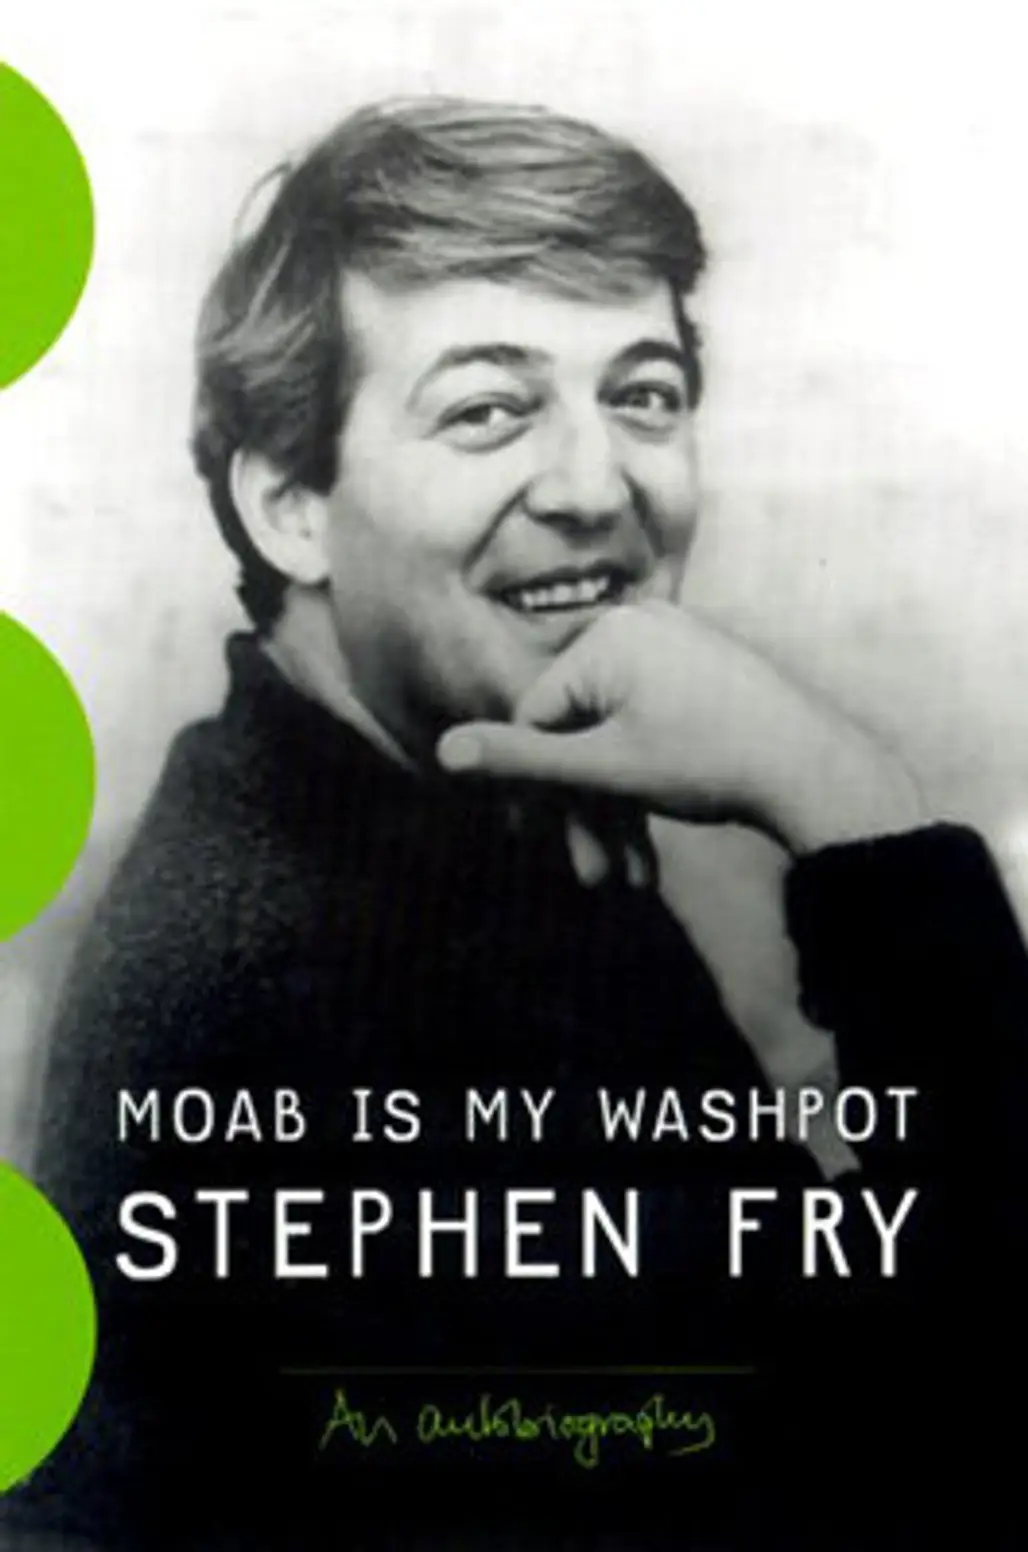 Stephen Fry ‘Moab is My Washpot’